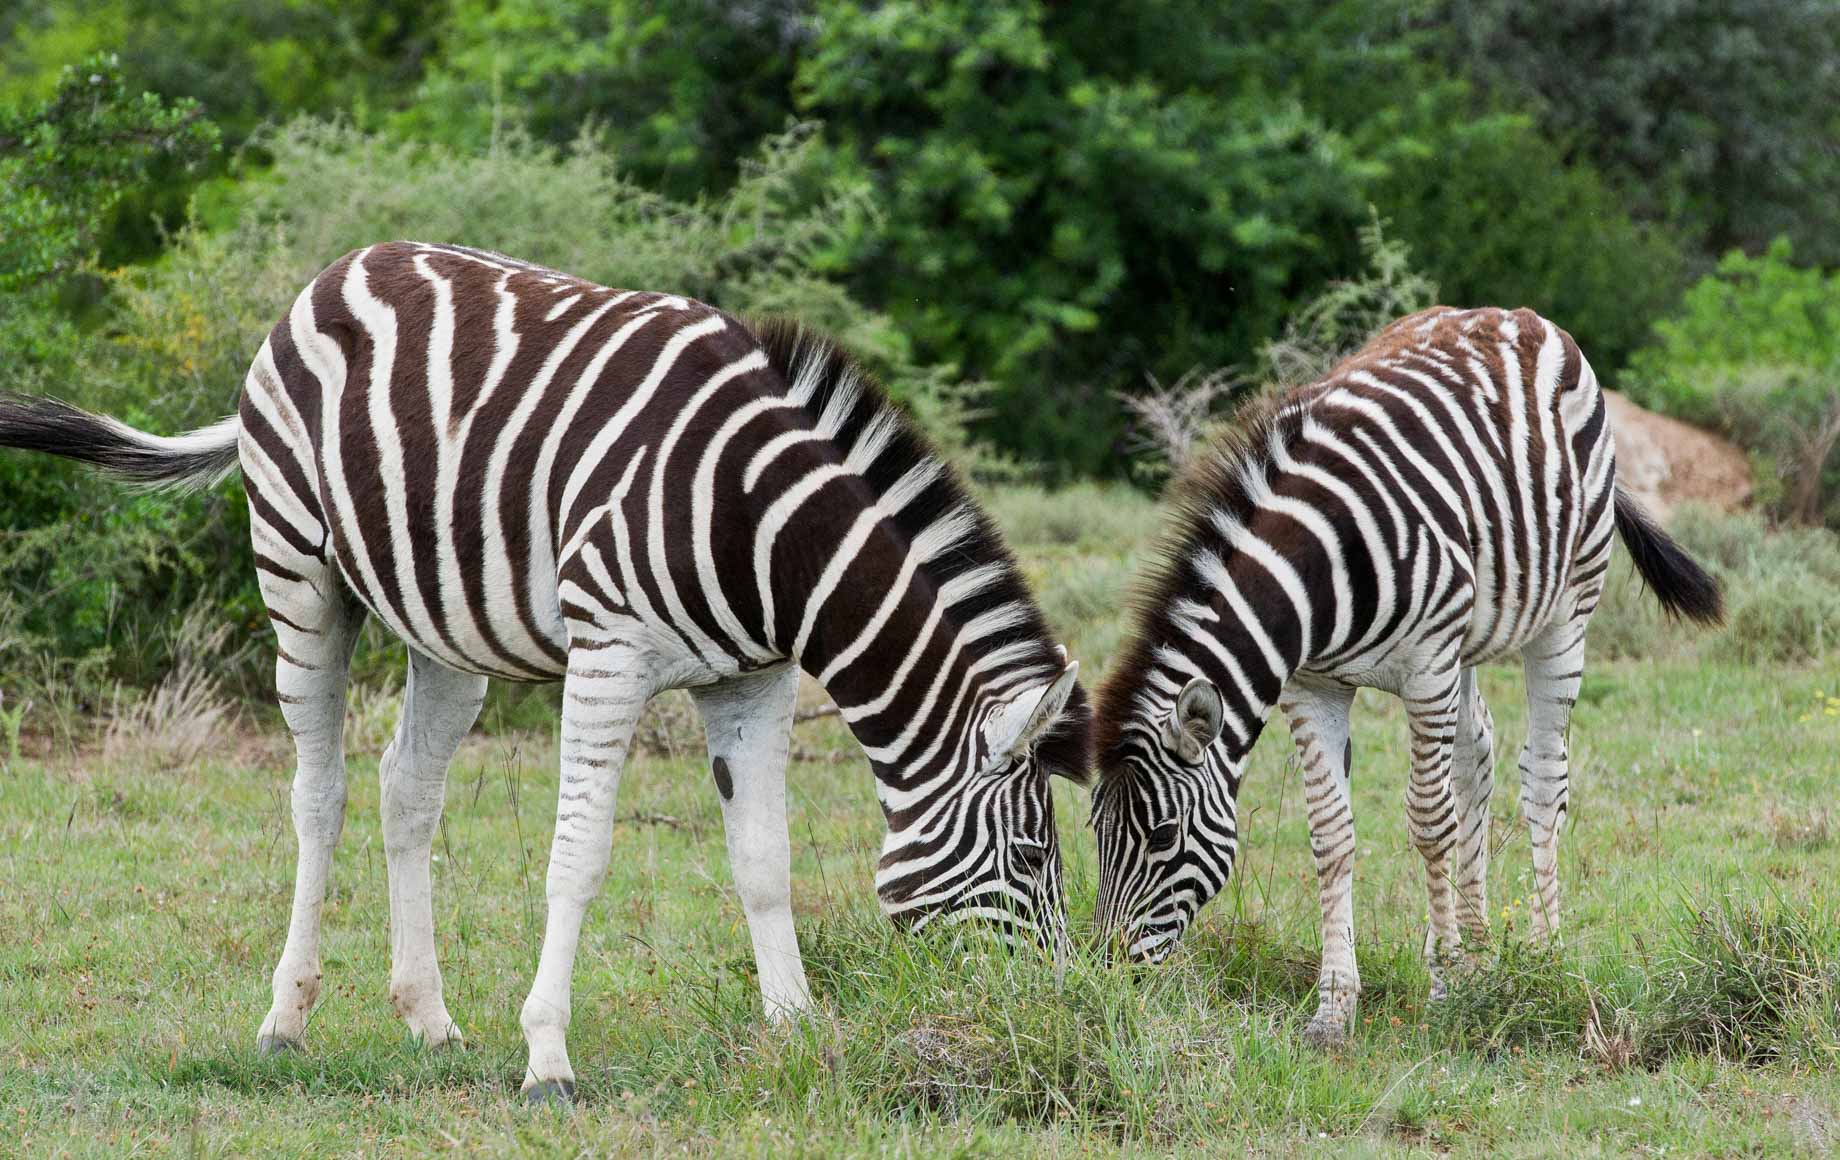 Zebras at The Eastern Cape